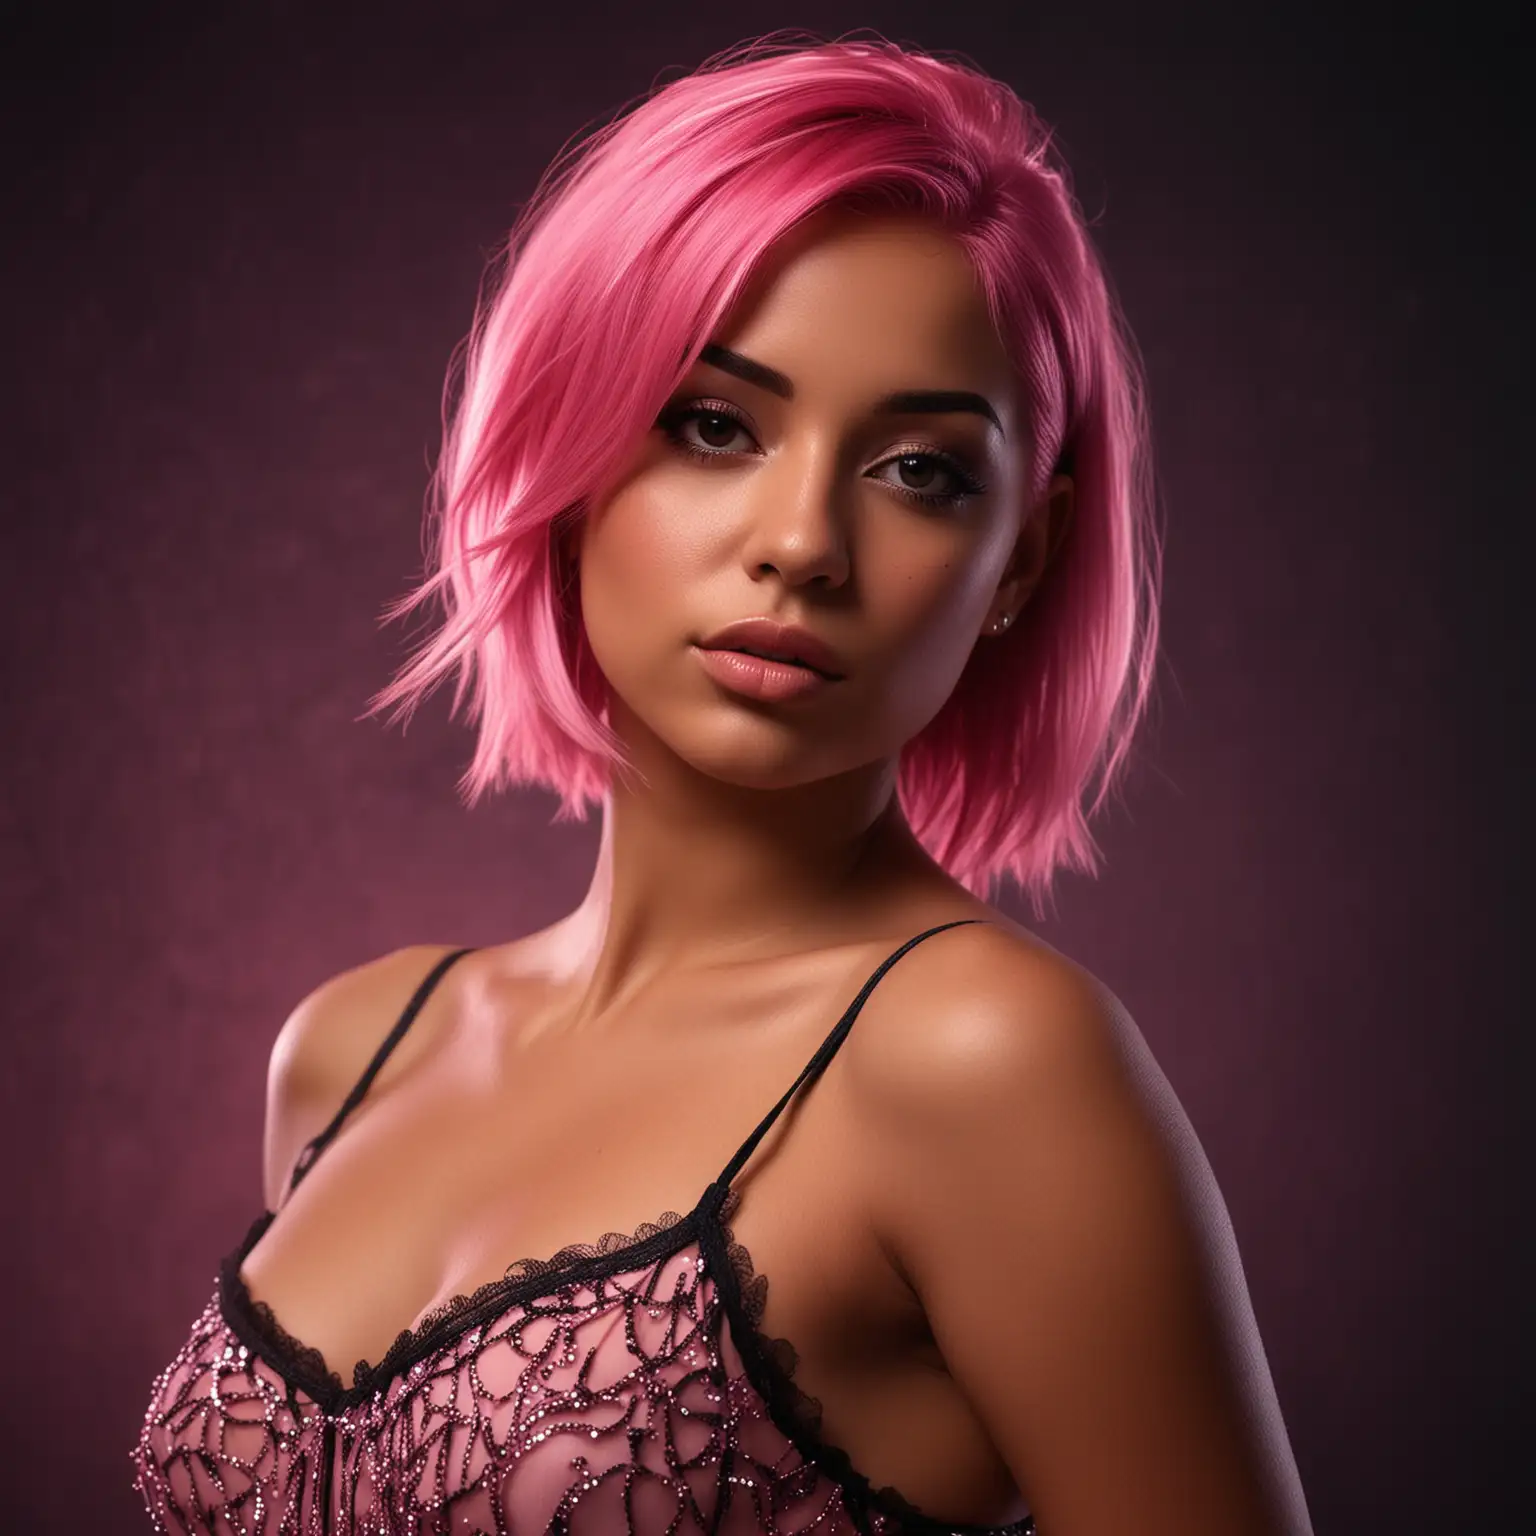 ULTRA REALISTIC high definition, CURVY SEDUCTIVE TAN SKIN LATIN WOMAN, WITH pink hair HIGHLIGHTS, WEARING A SMALL pink dress on a dark smokey background with neon cinematic lighting